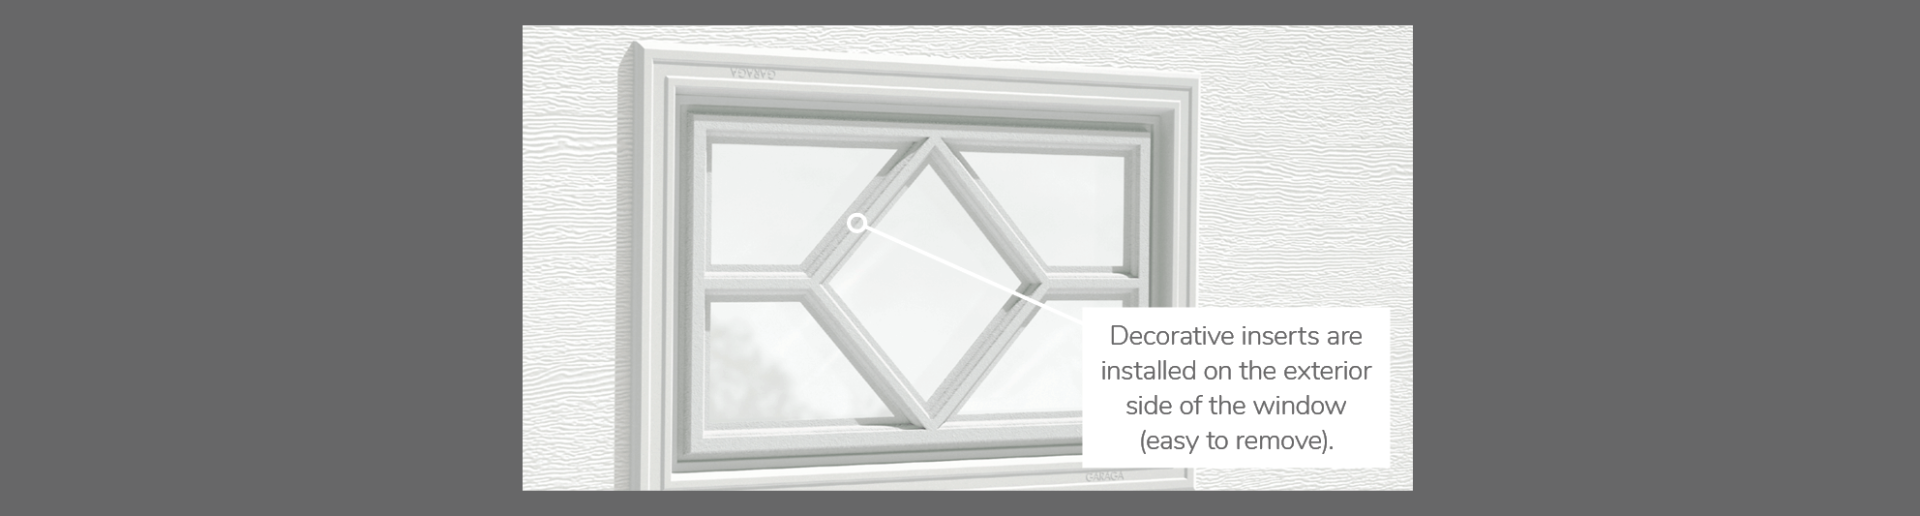 Waterton Decorative Insert, 20" x 13", available for door 3 layers - Polystyrene, 2 layers - Polystyrene and Non-insulated